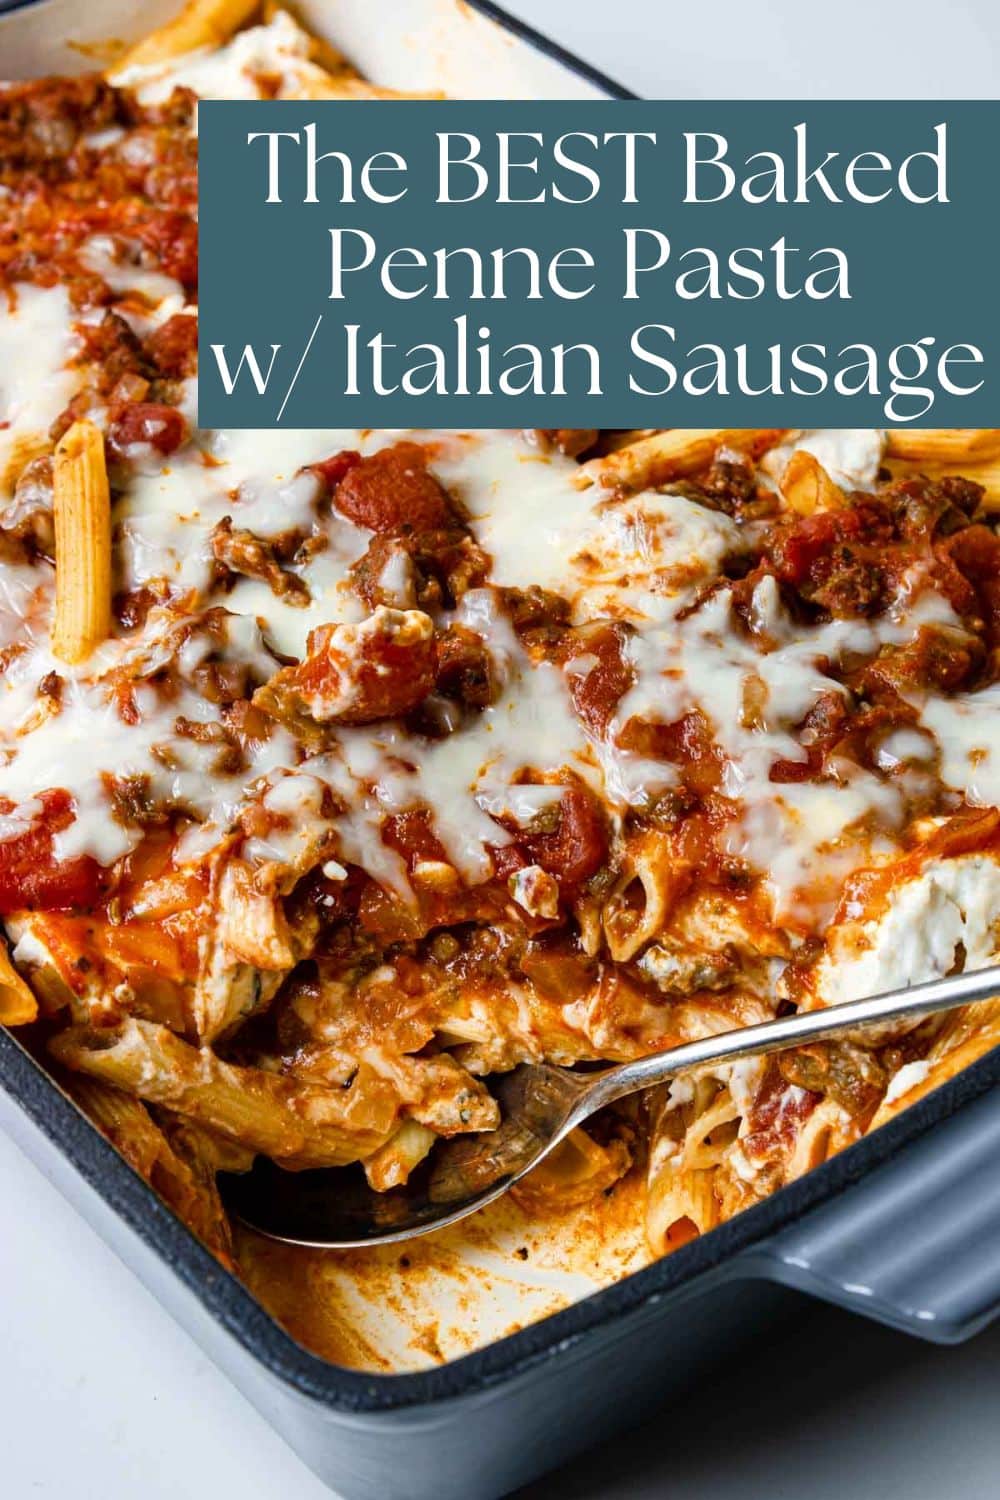 Pinterest Image with text overlay for baked penne pasta recipe